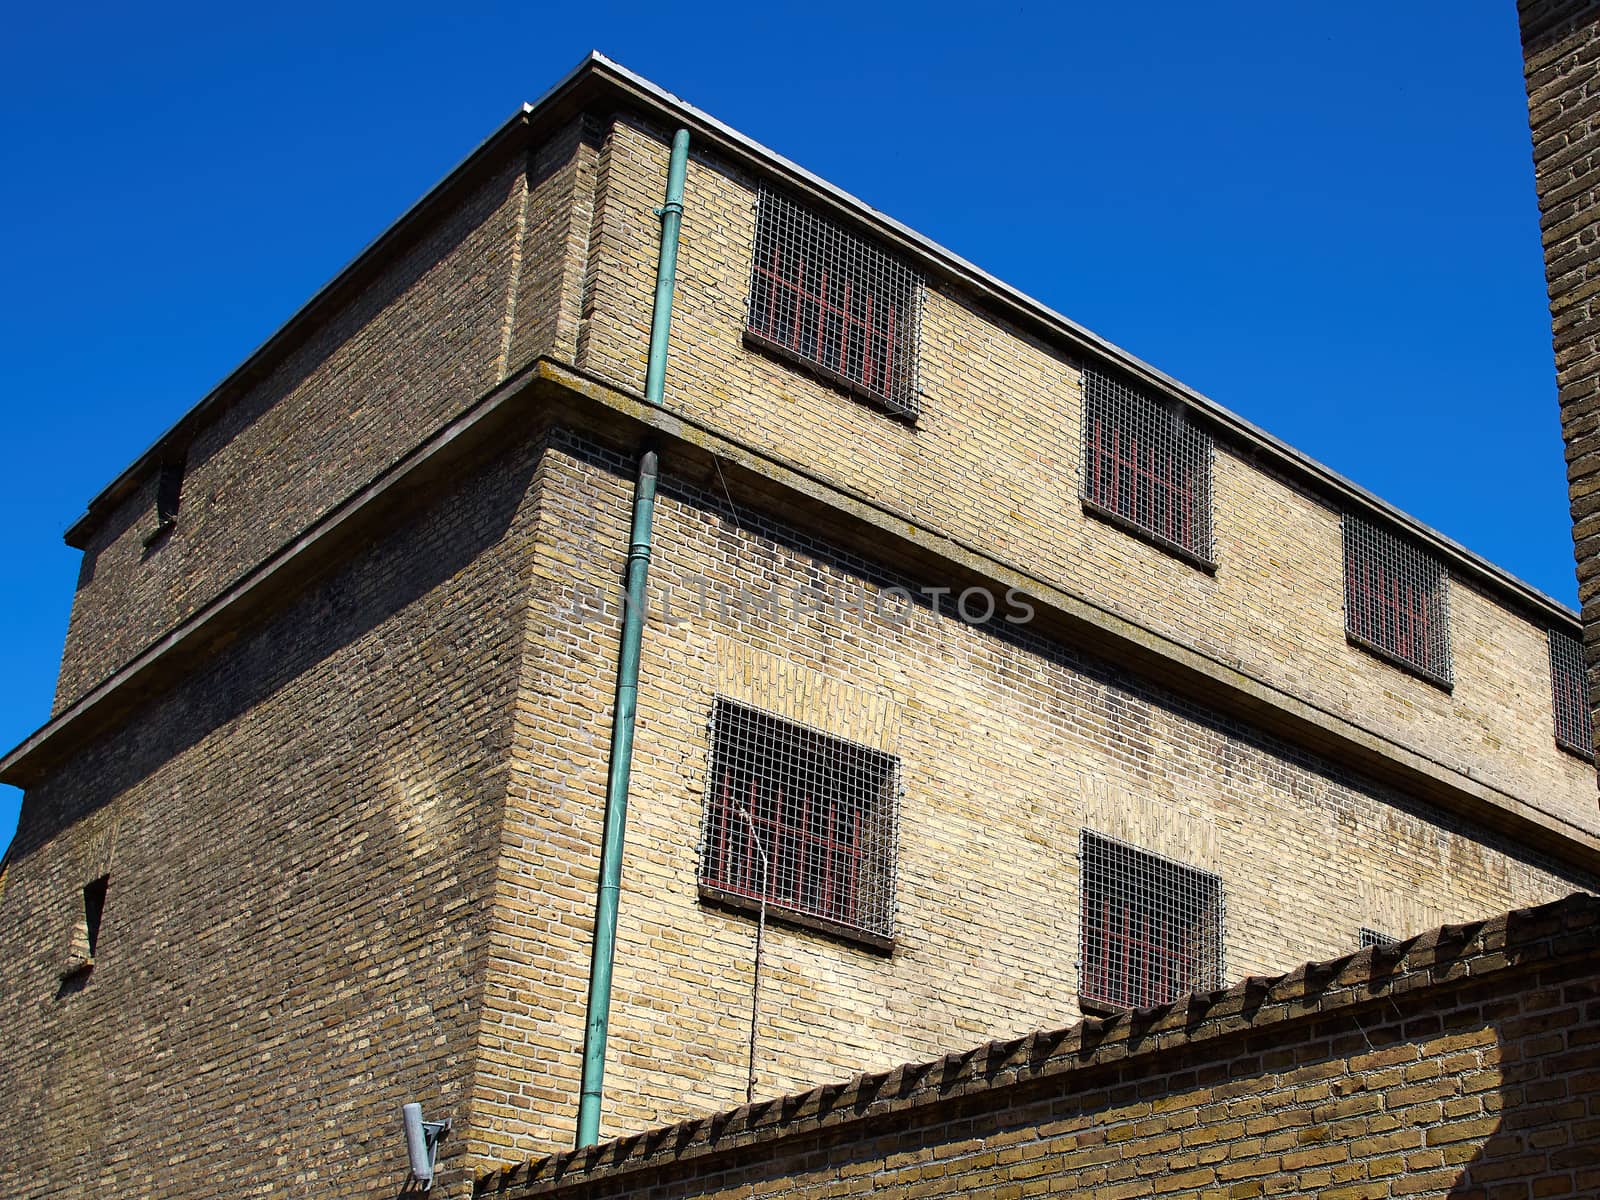 Old prison jail and windows with heavy iron bars